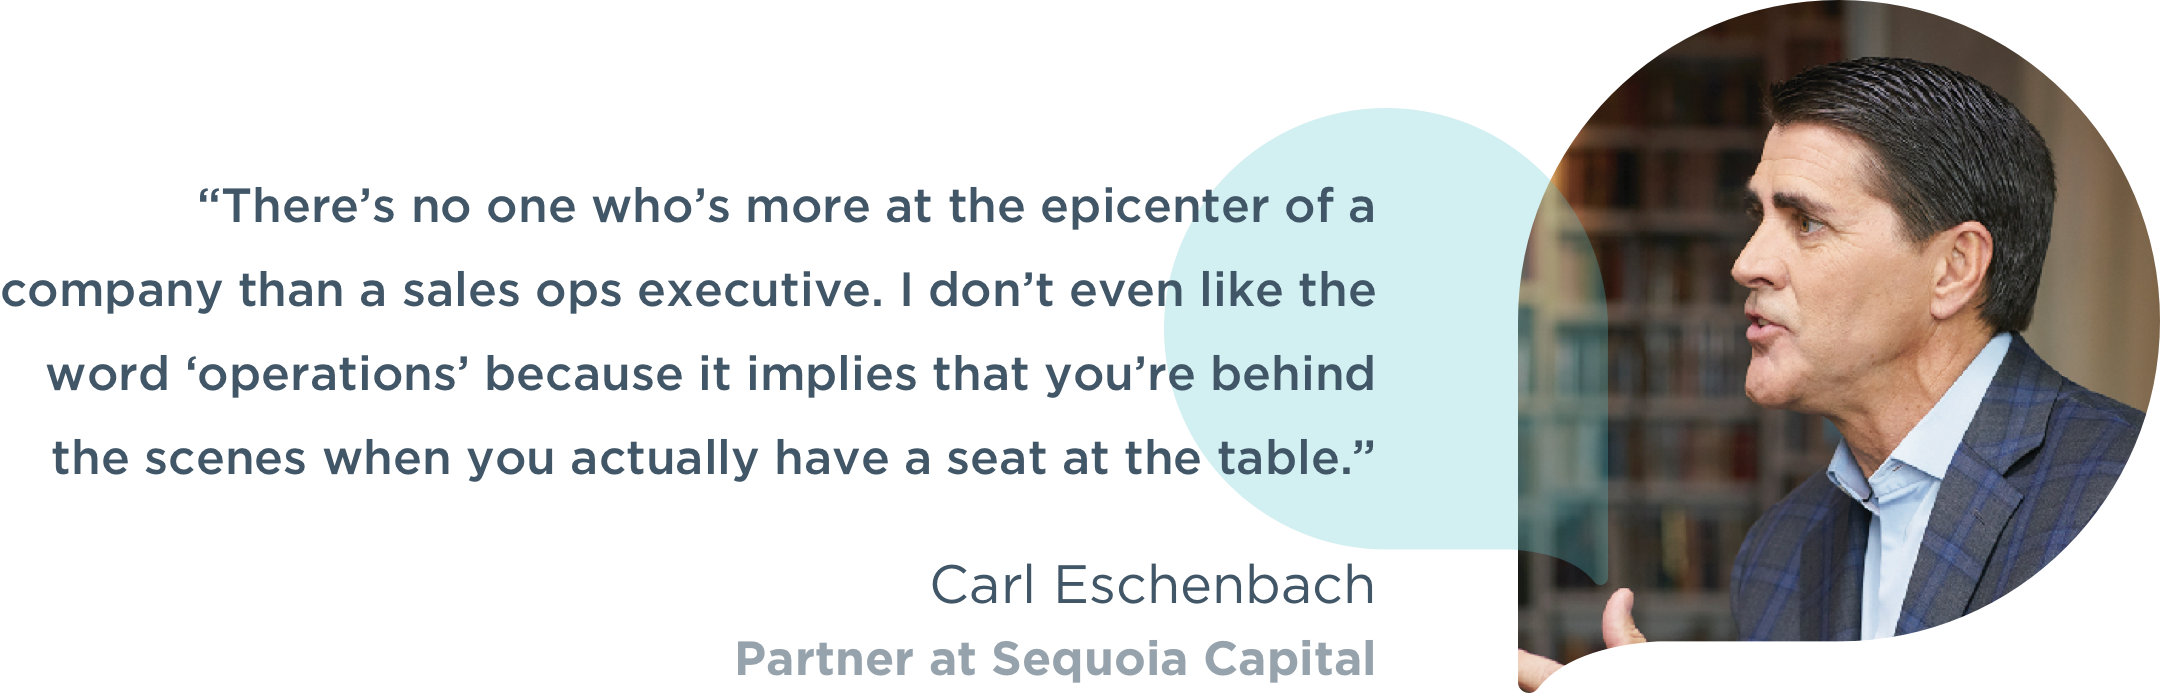 Carl Eschenbach, Partner at Sequoia Capital, headshot and quotation about sales ops executives